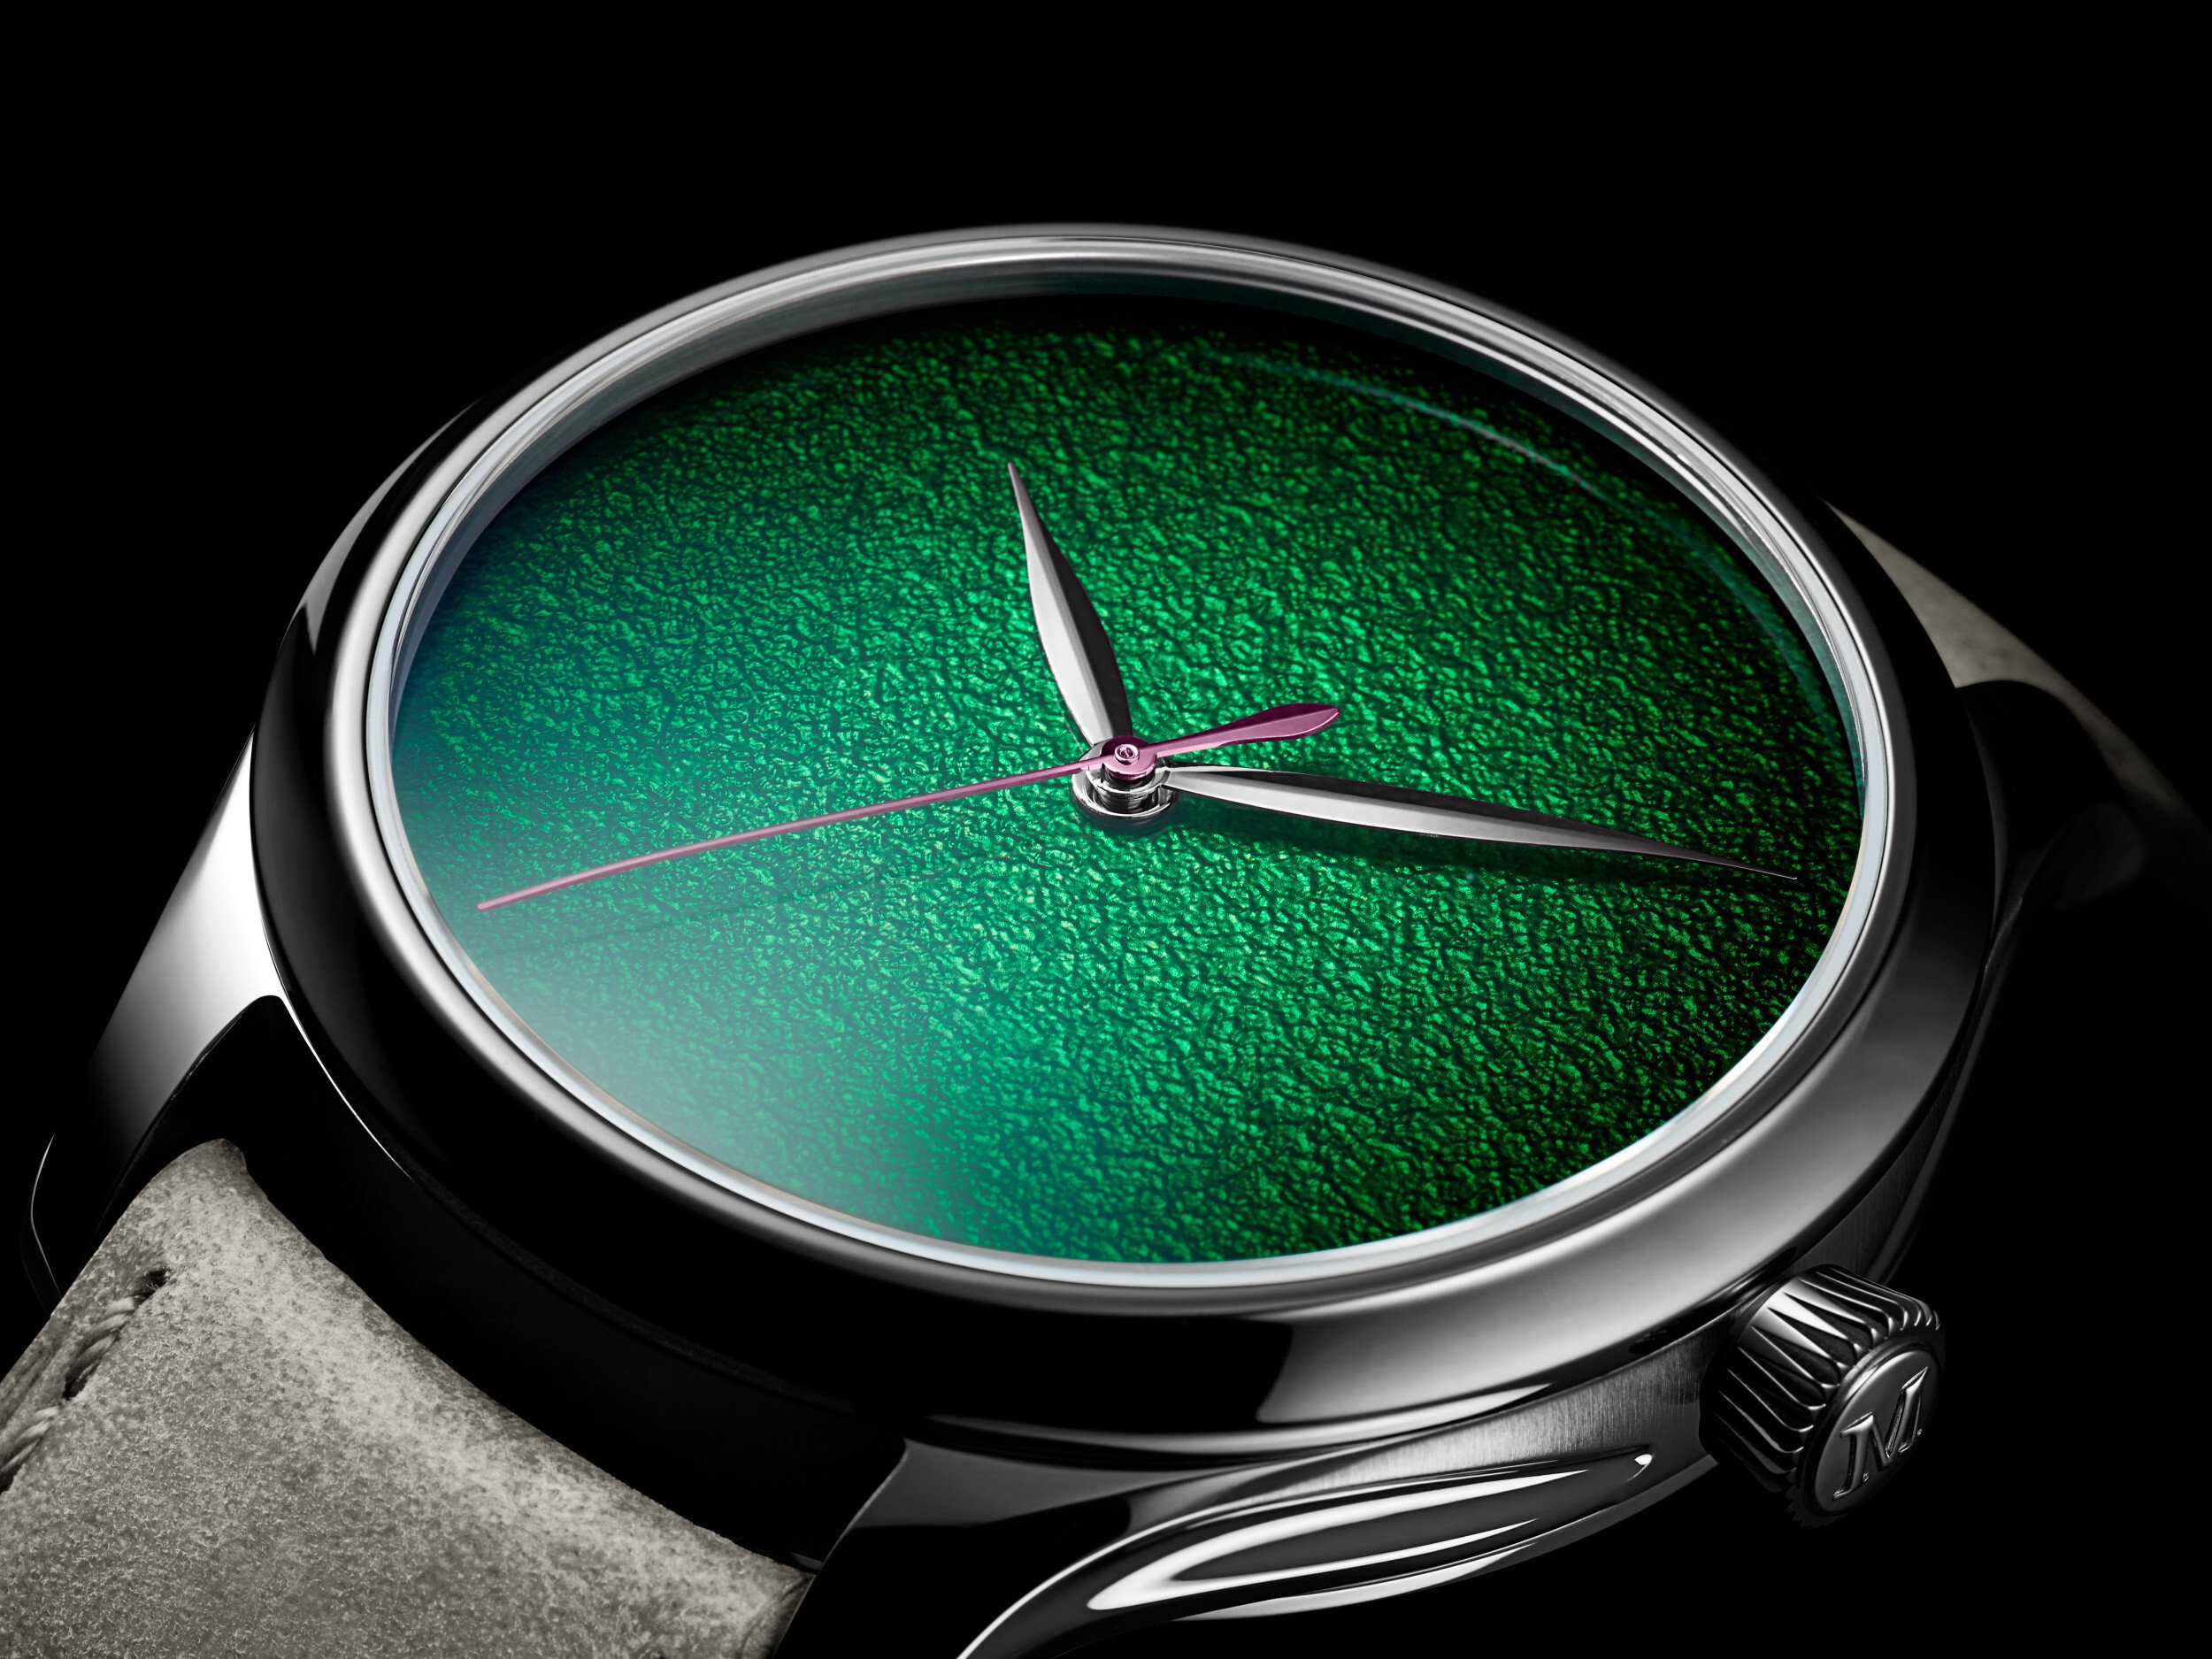 With Endeavour Centre Seconds Concept Lime Green, whose green dial fades to black on the perimeter, H. Moser & Cie have reinvented fumé with a much more complicated technique. Photo: H. Moser & Cie 